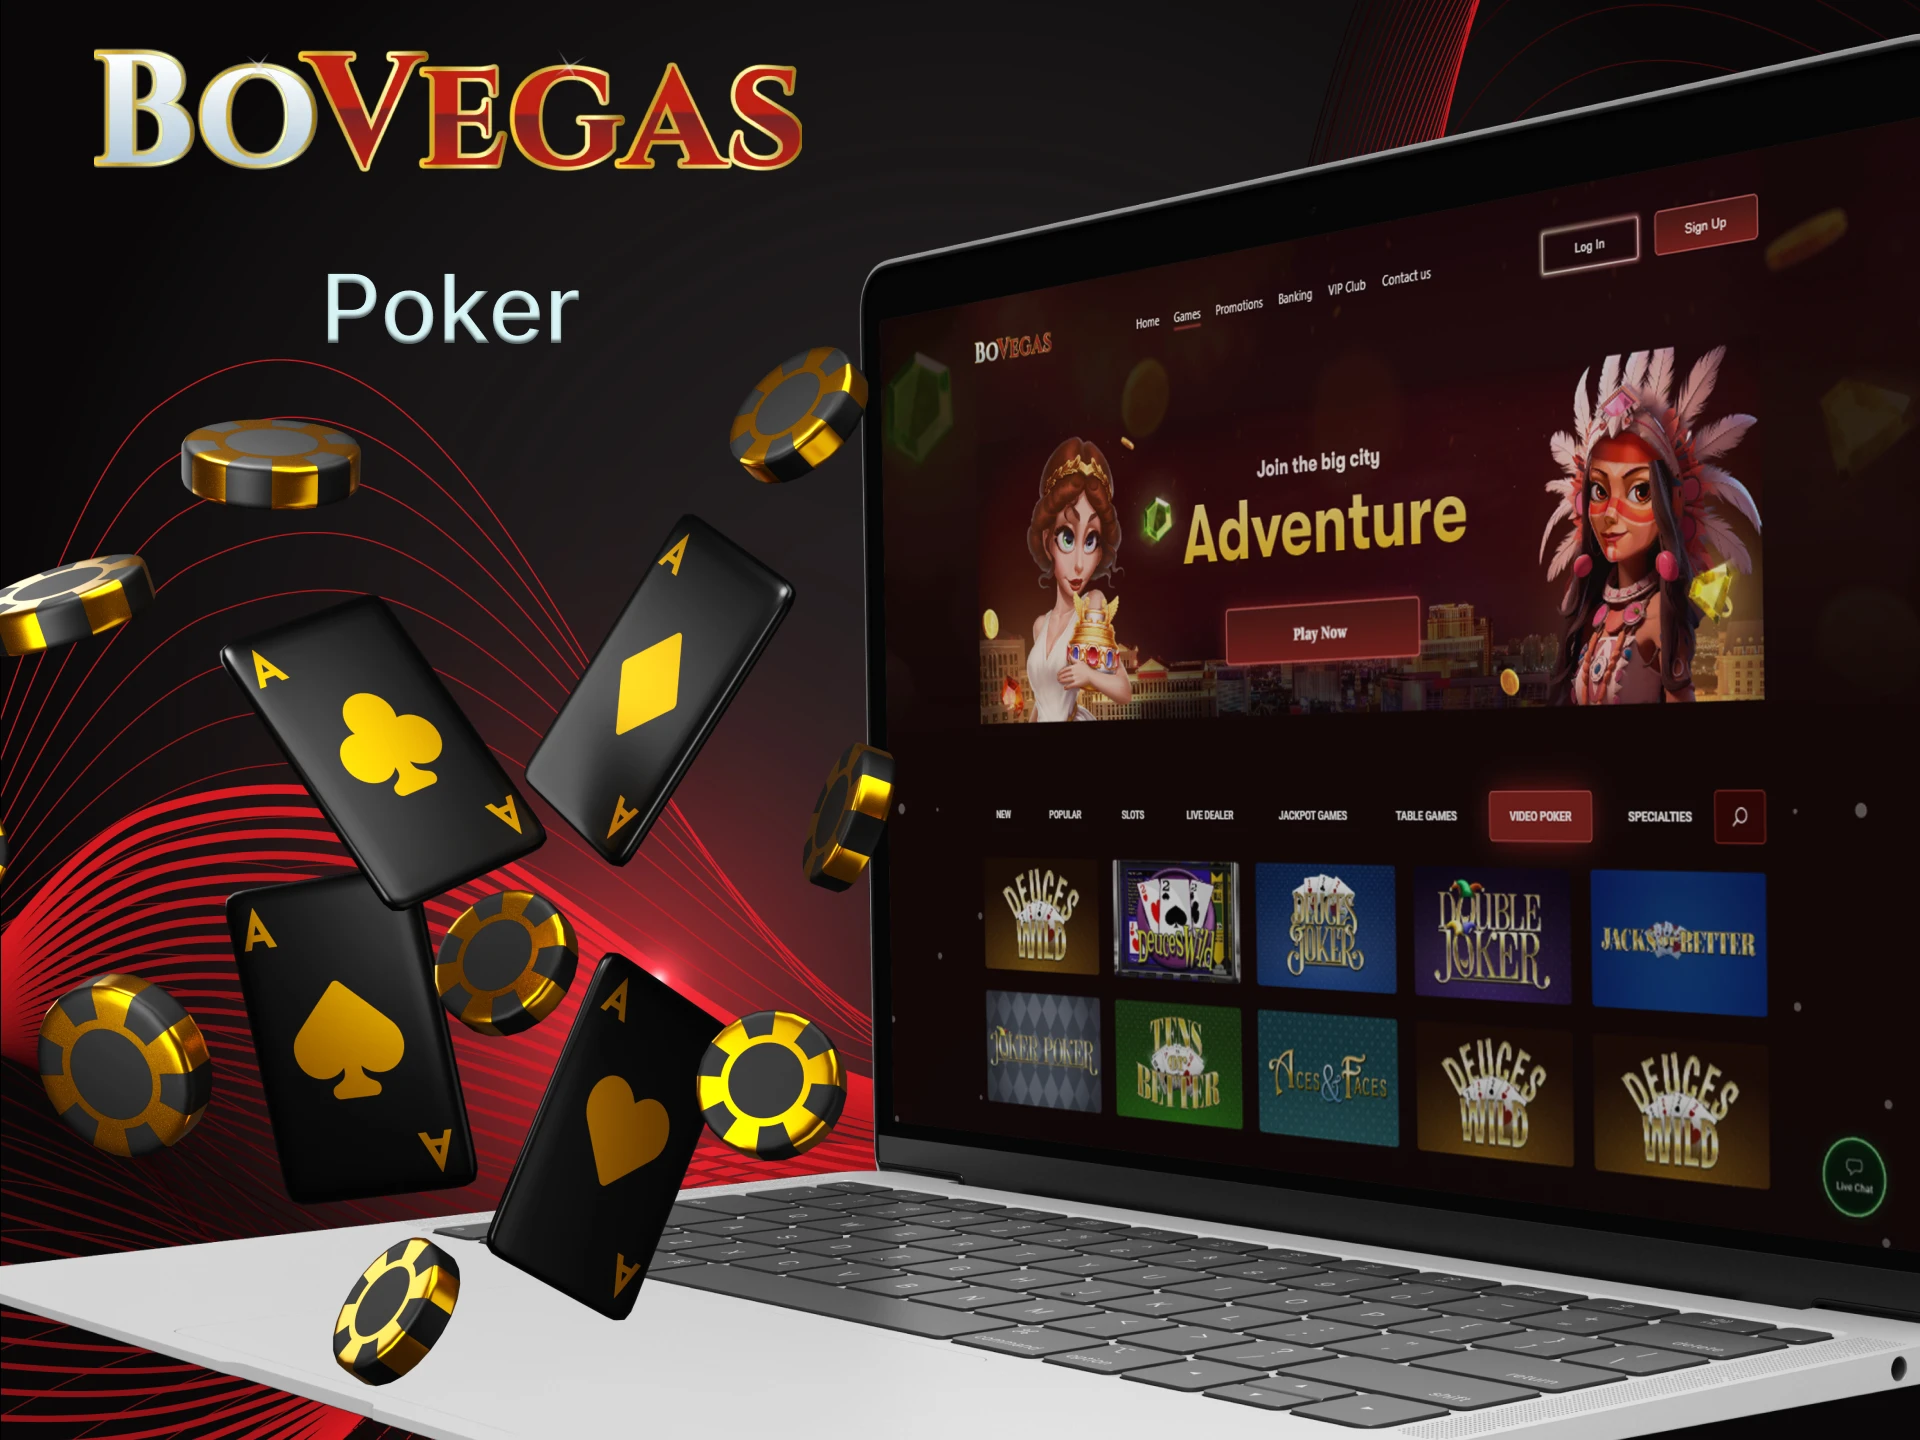 Discover many different poker games at BoVegas Casino.